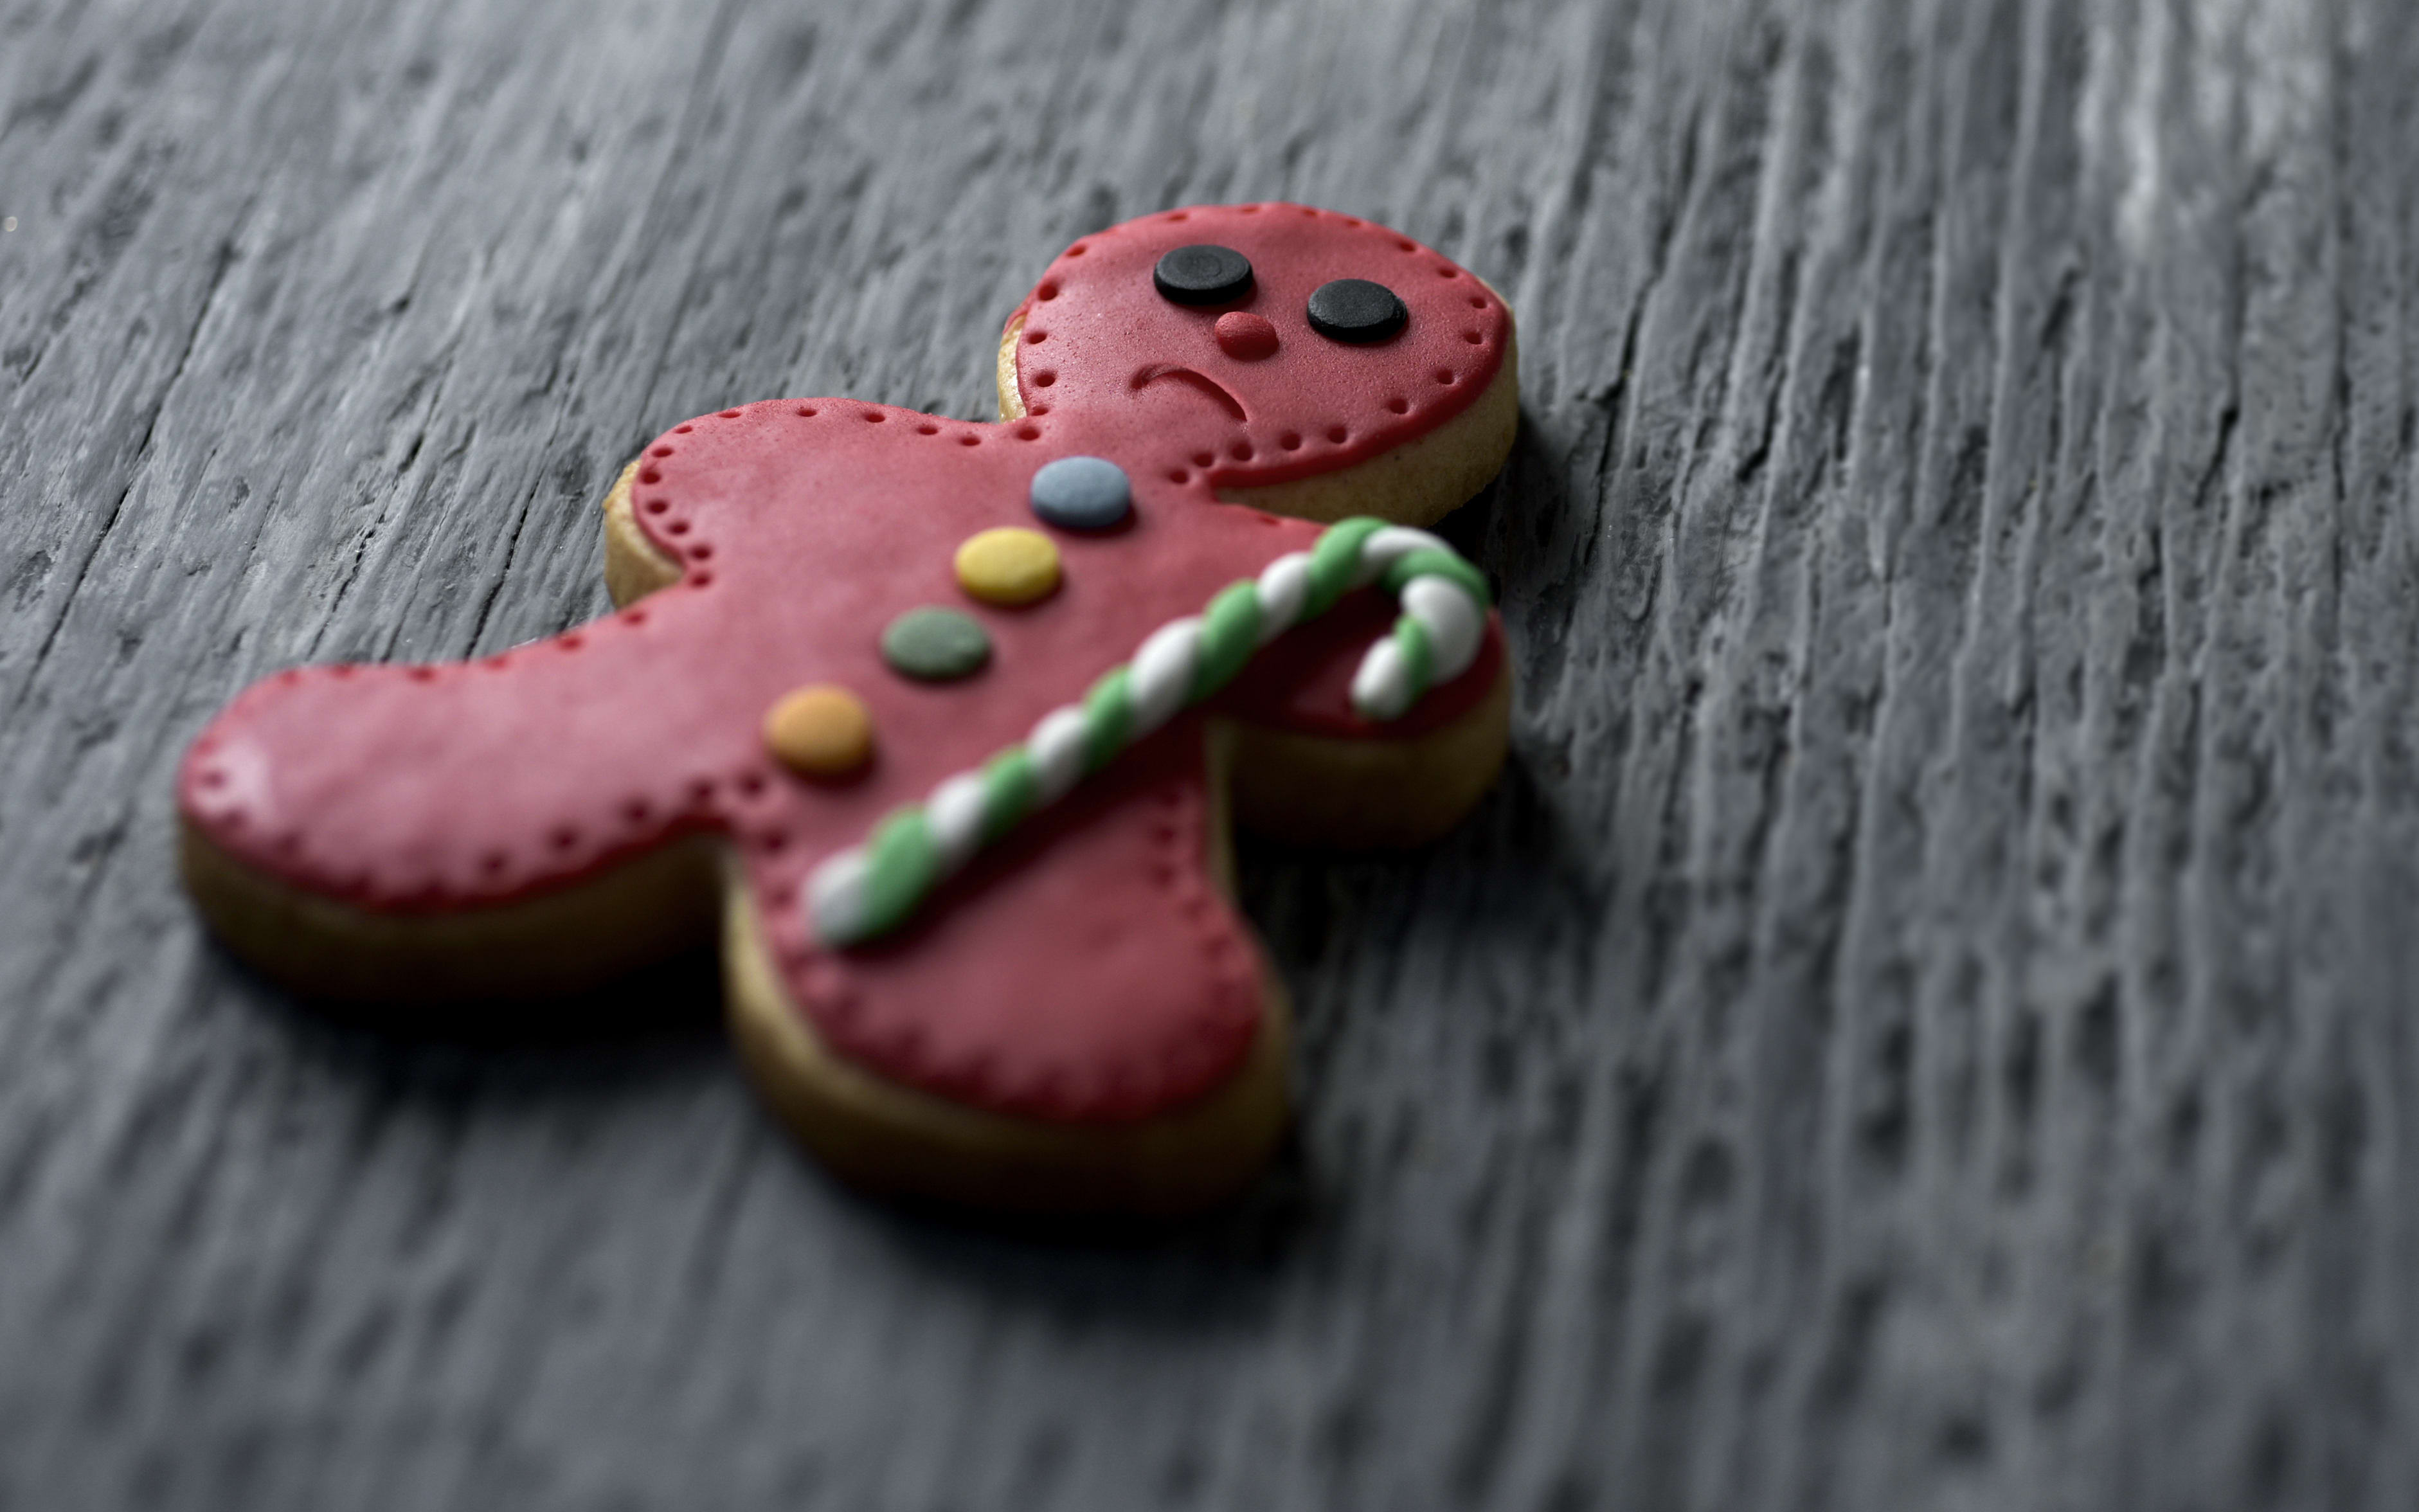 closeup of a sad gingerbread man on a rustic wooden surface, with a negative space